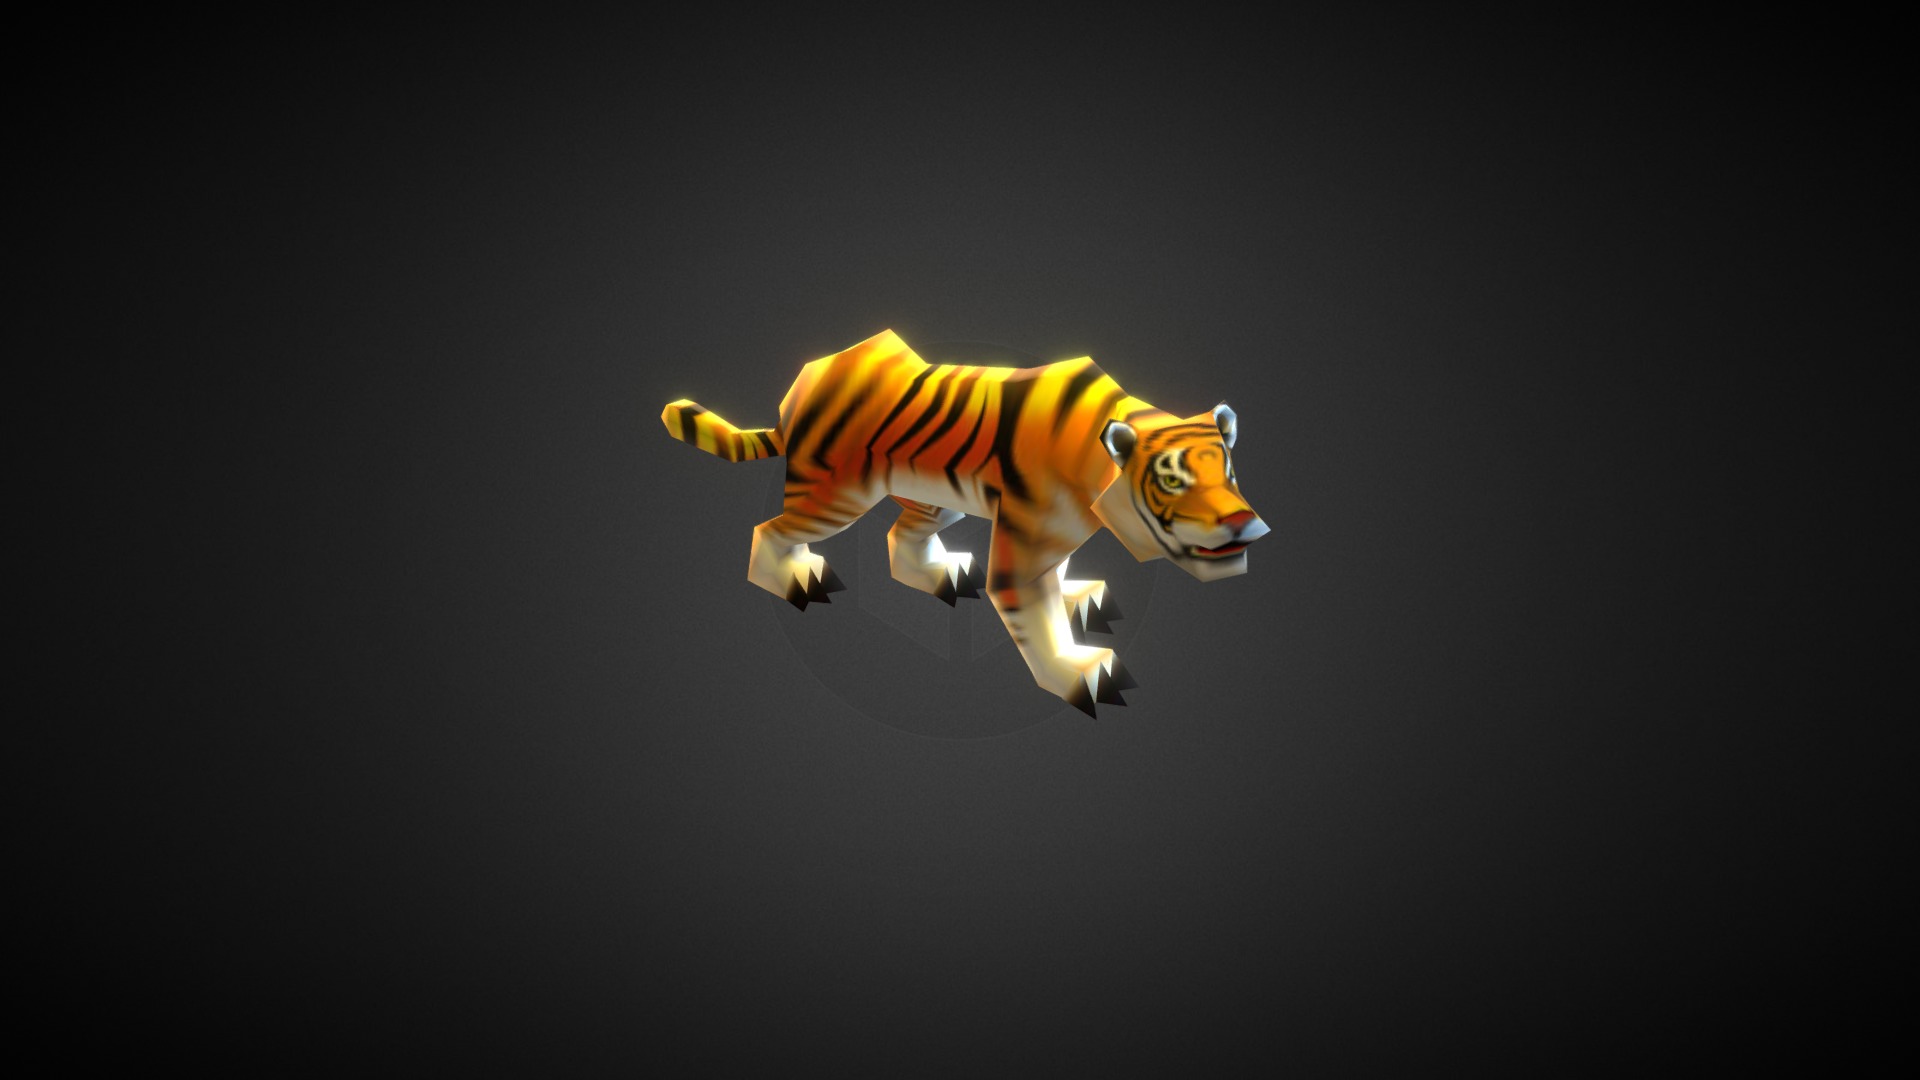 3D model Lowpoly Tiger - This is a 3D model of the Lowpoly Tiger. The 3D model is about a yellow and white fish.